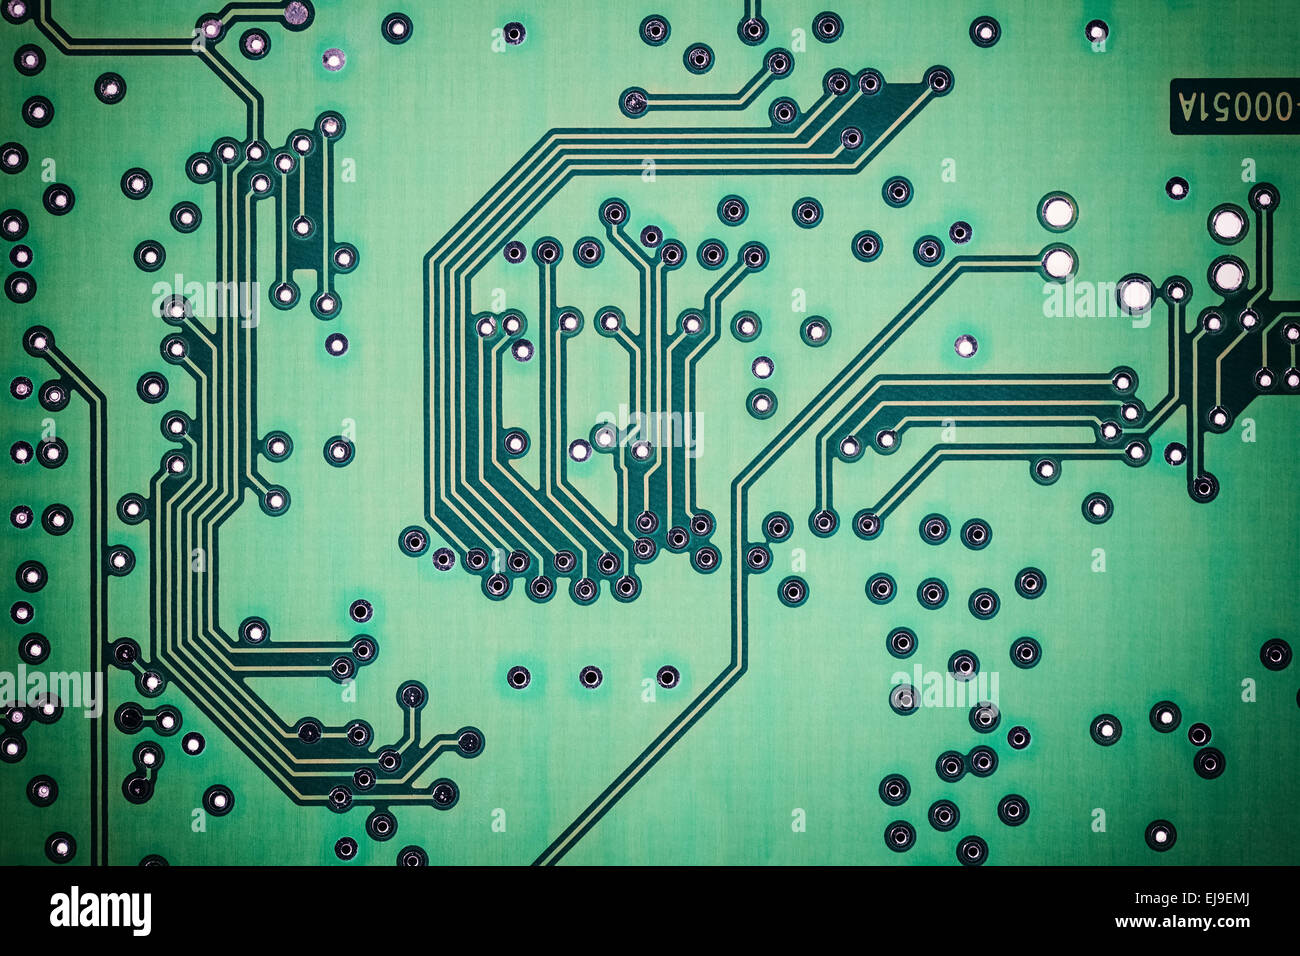 printed circuit board background Stock Photo